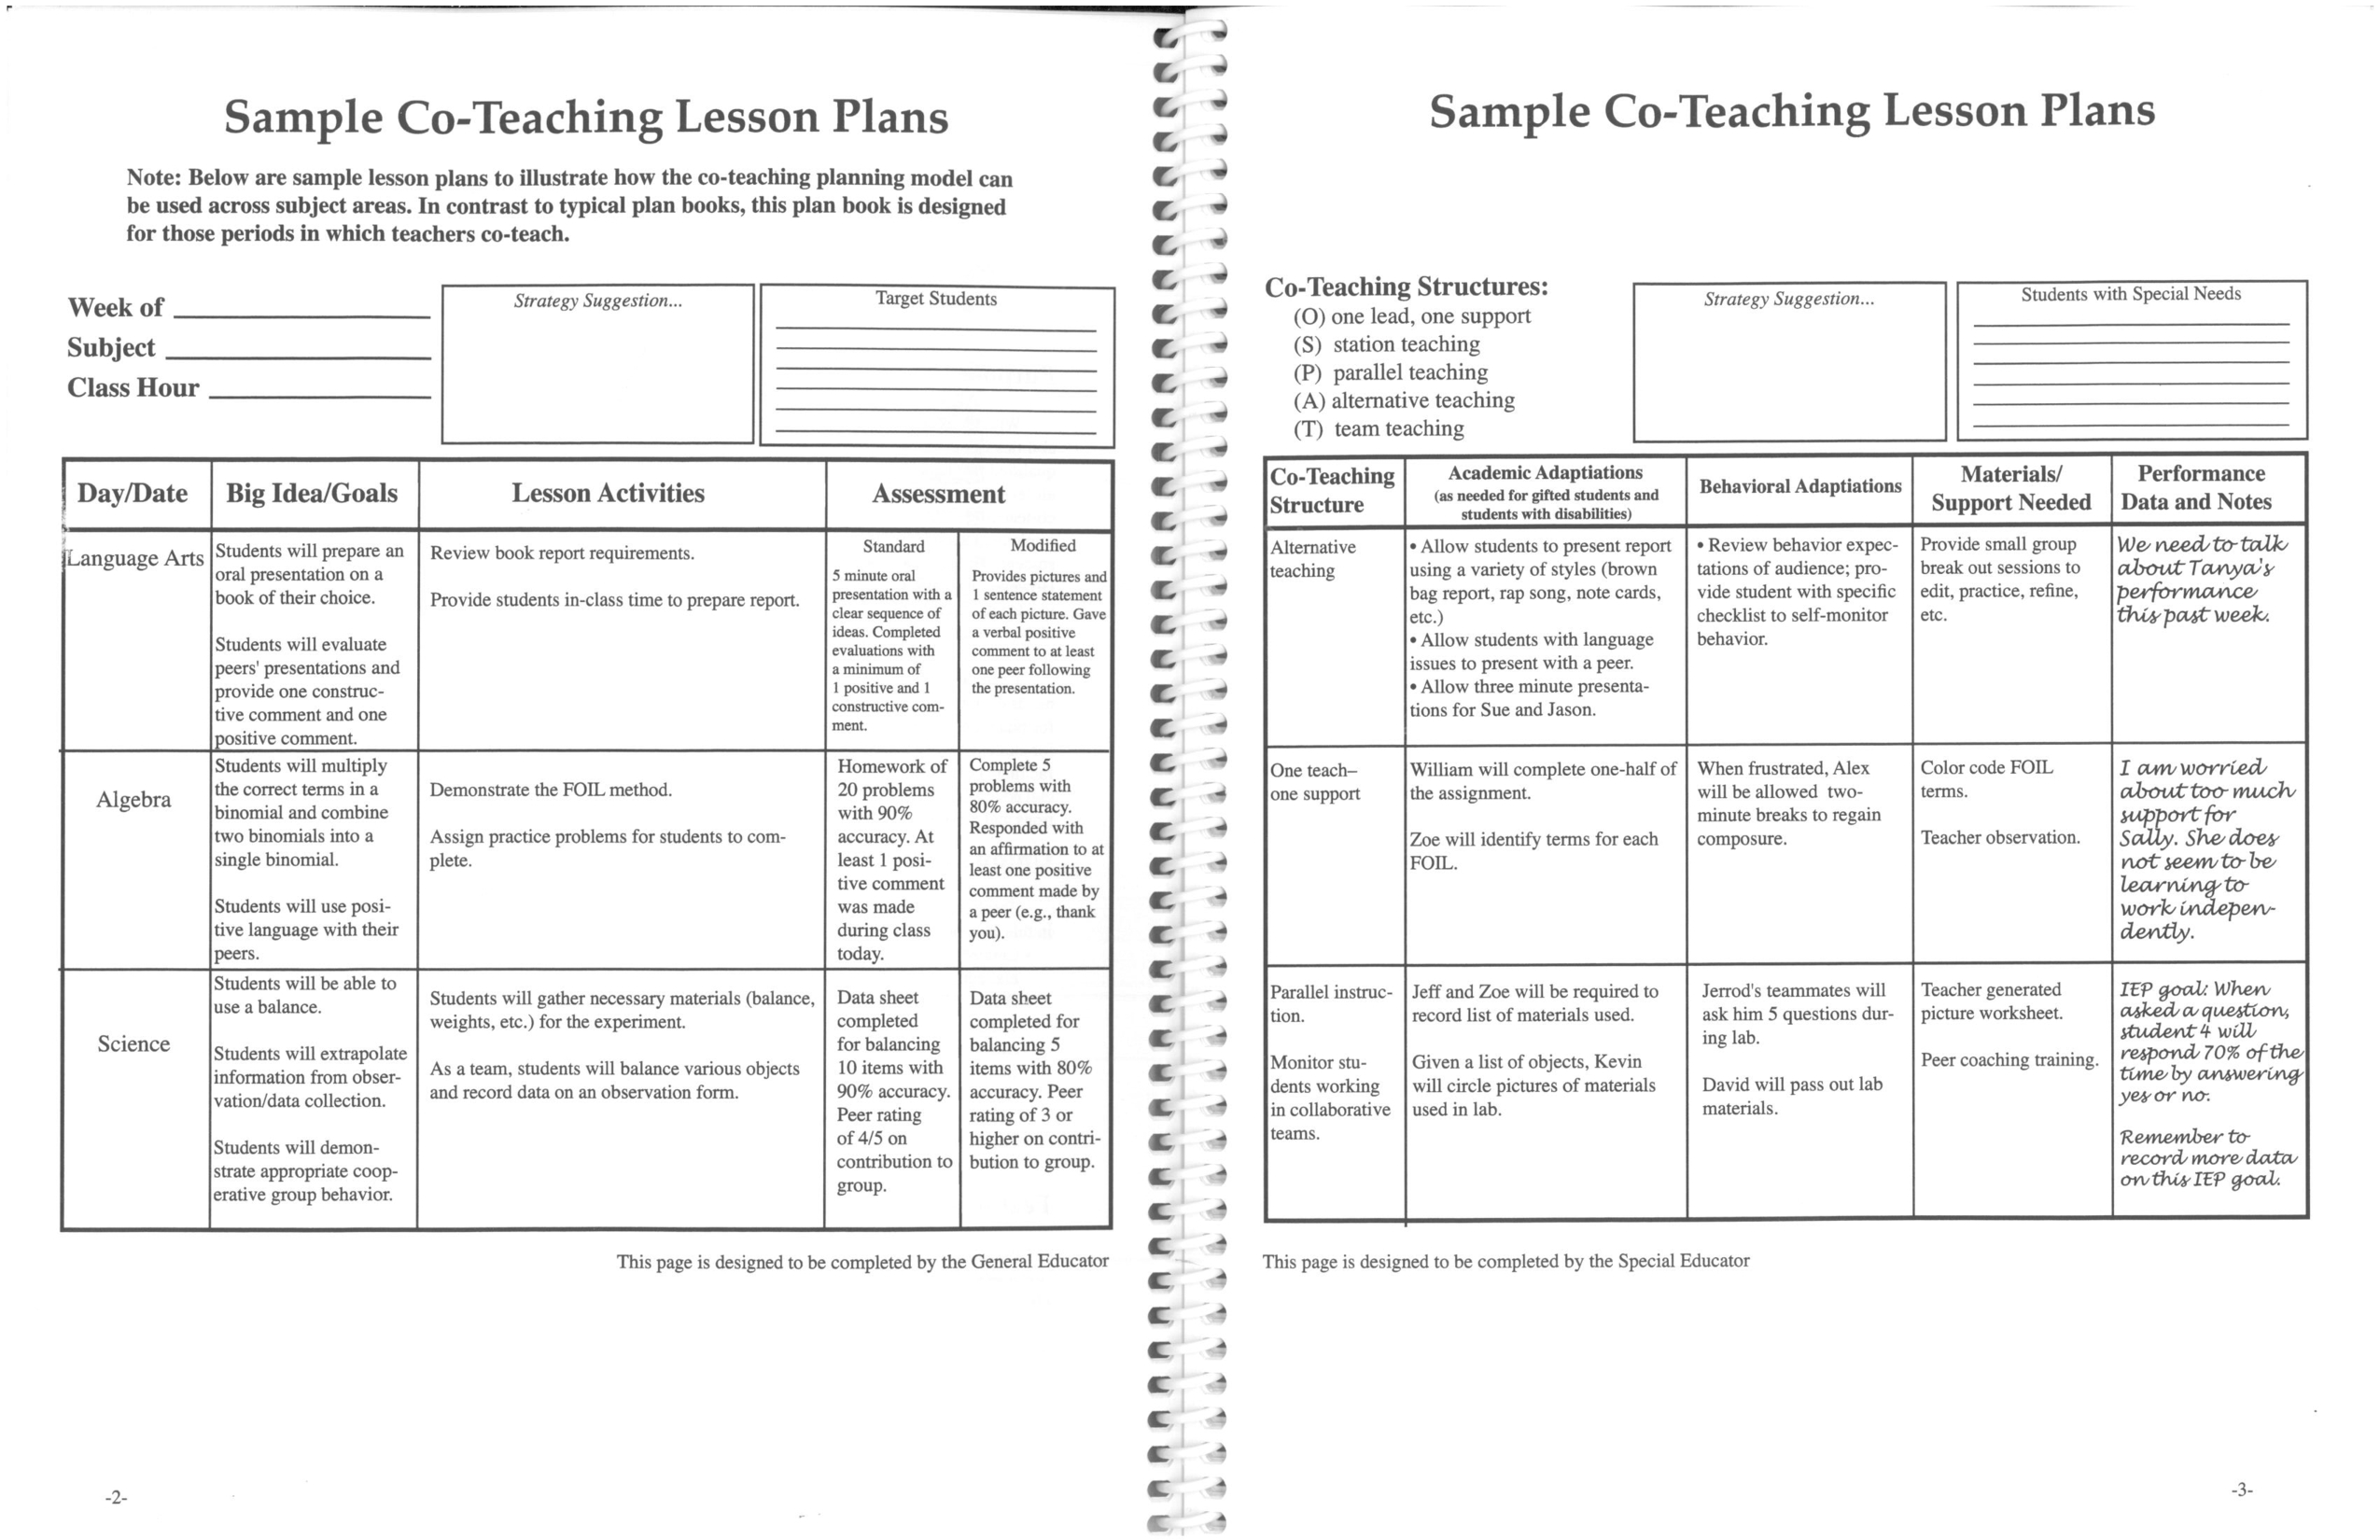 Image Result For Co-Teaching Lesson Plan Example | Teaching